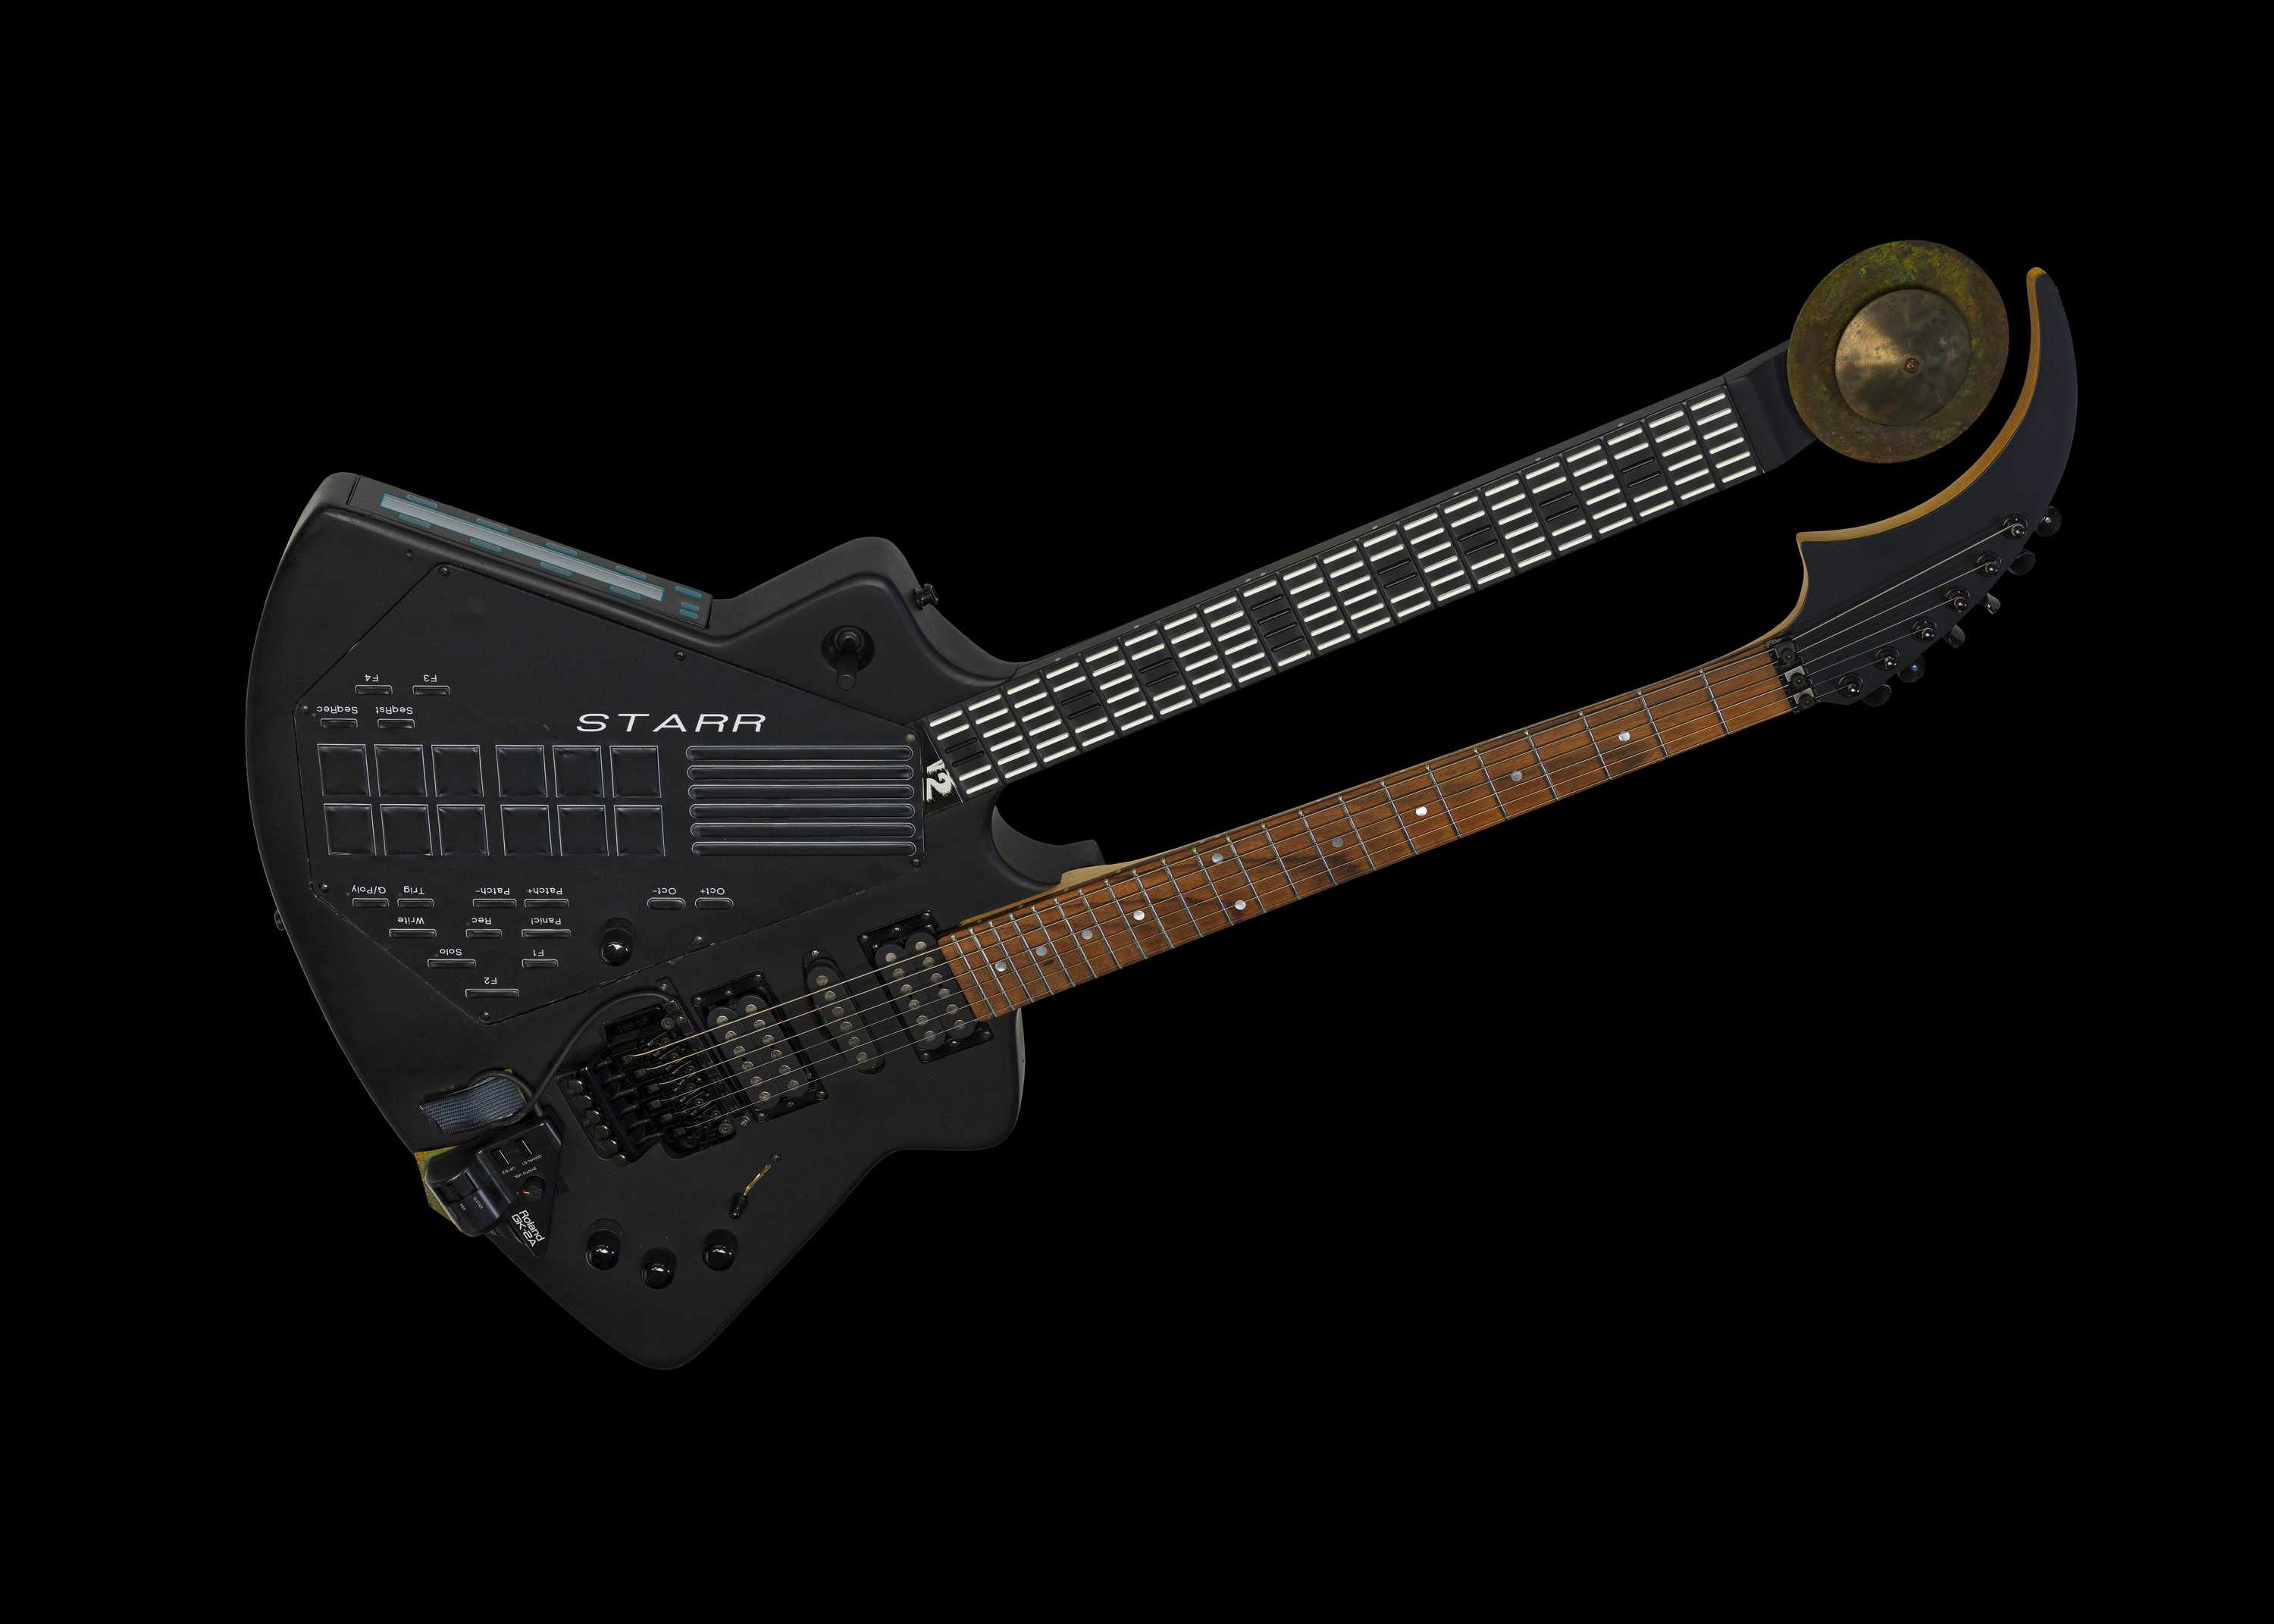 The double guitar synth has two frettboards and a conjoined body.